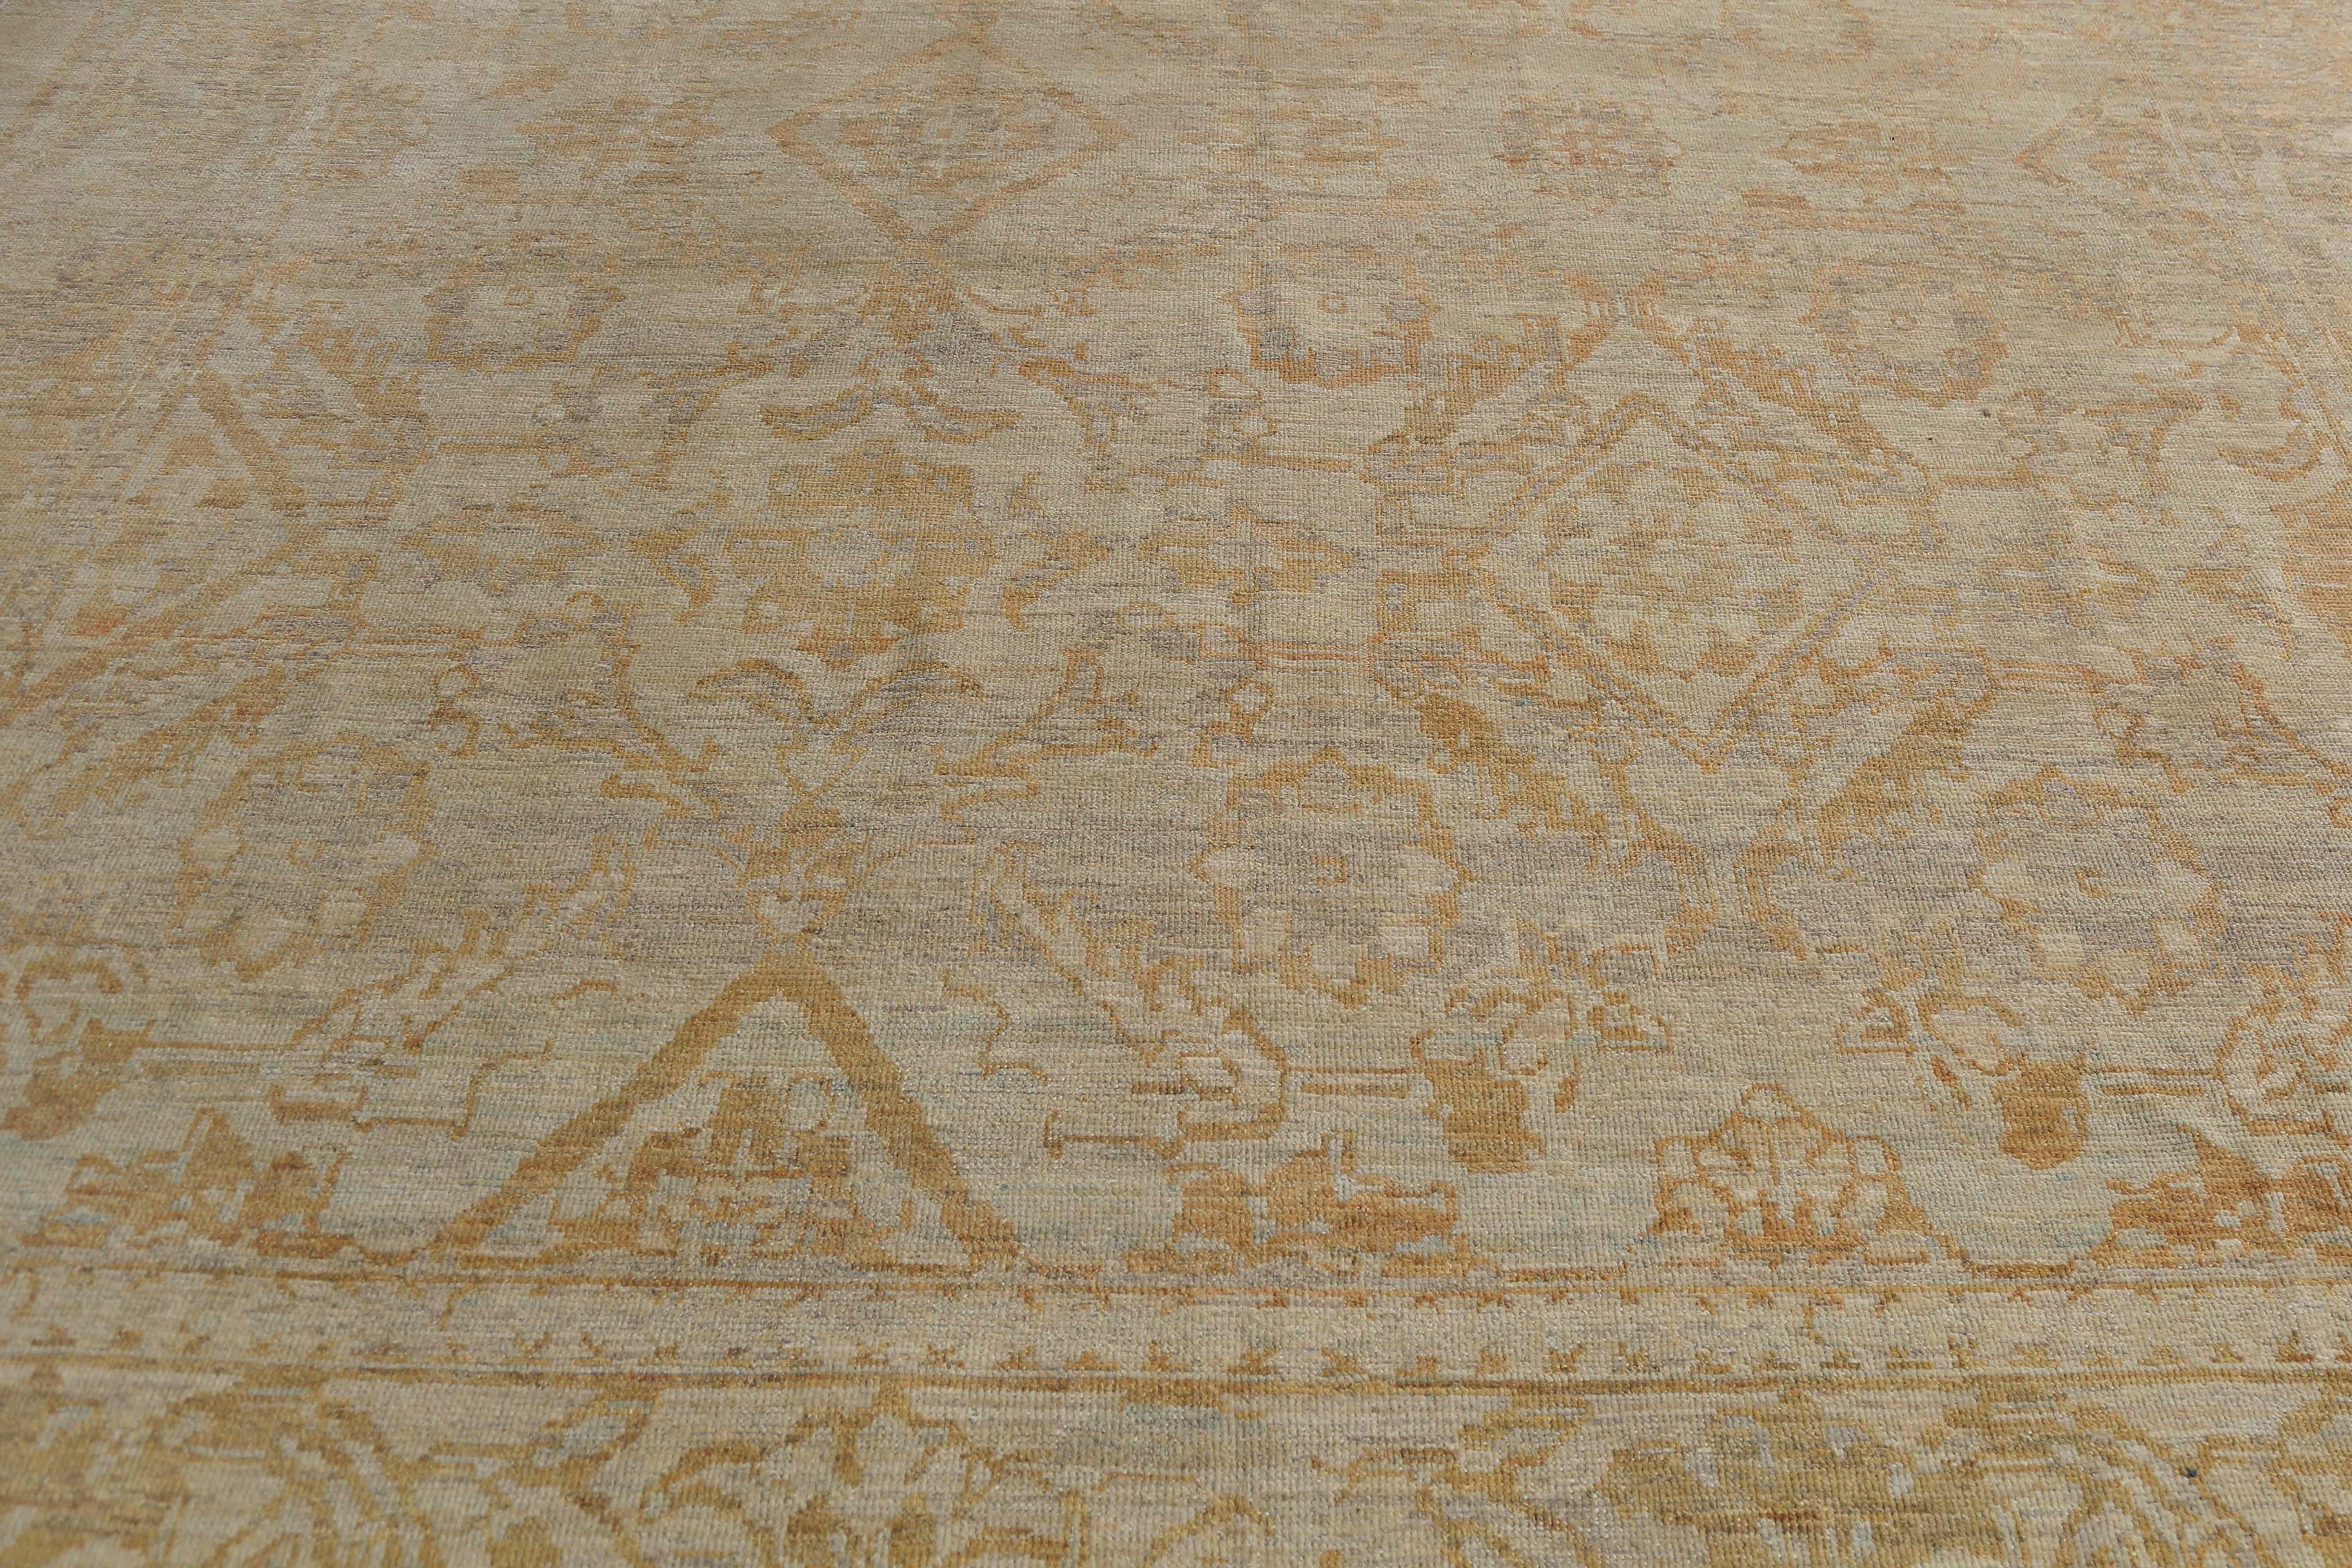 Stunning Turkish Sultanabad Muted Colors For Sale 4